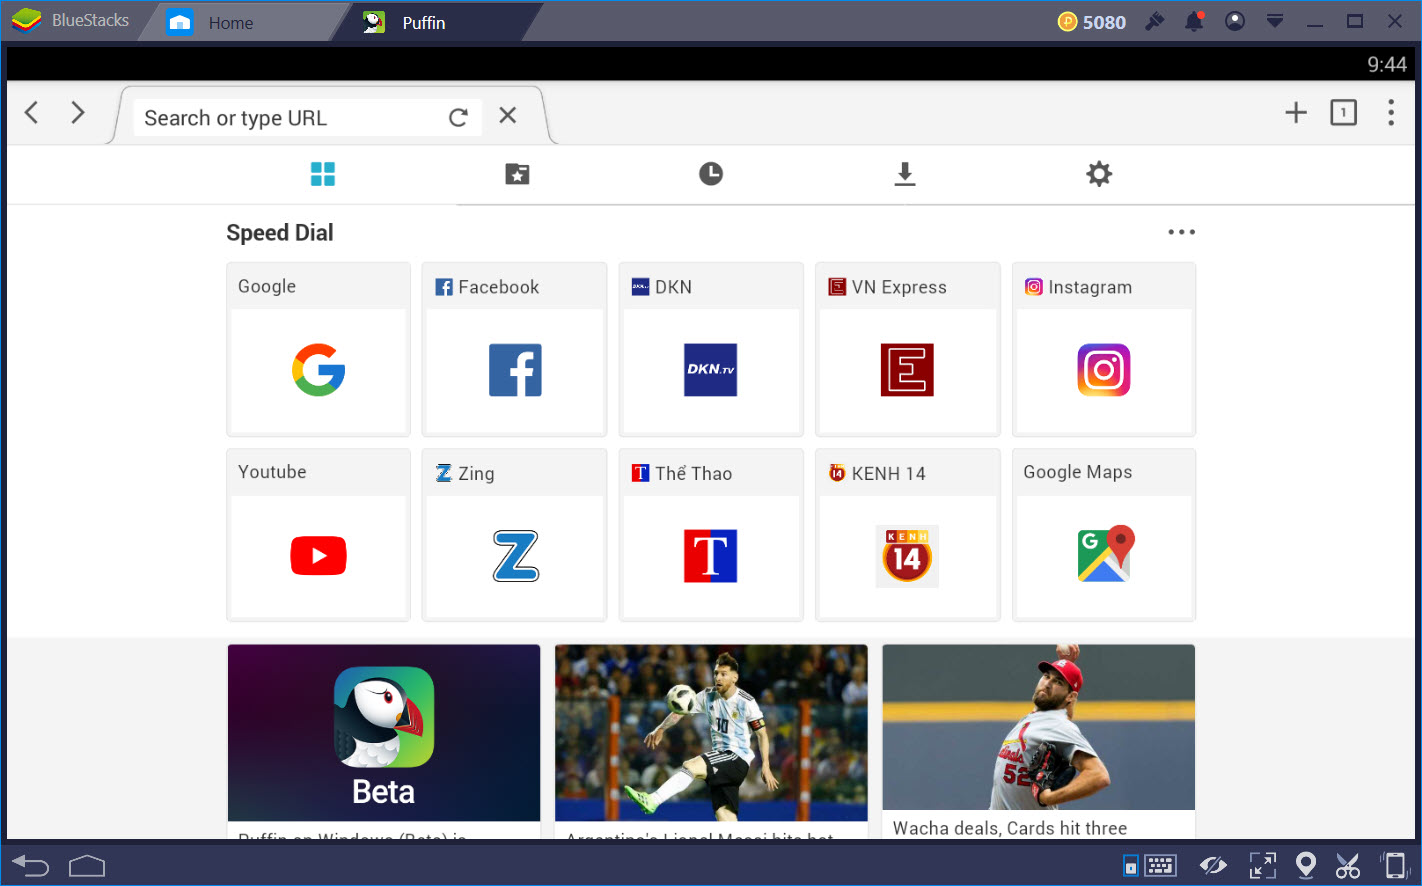 Puffin Browser For Pc Windows 10